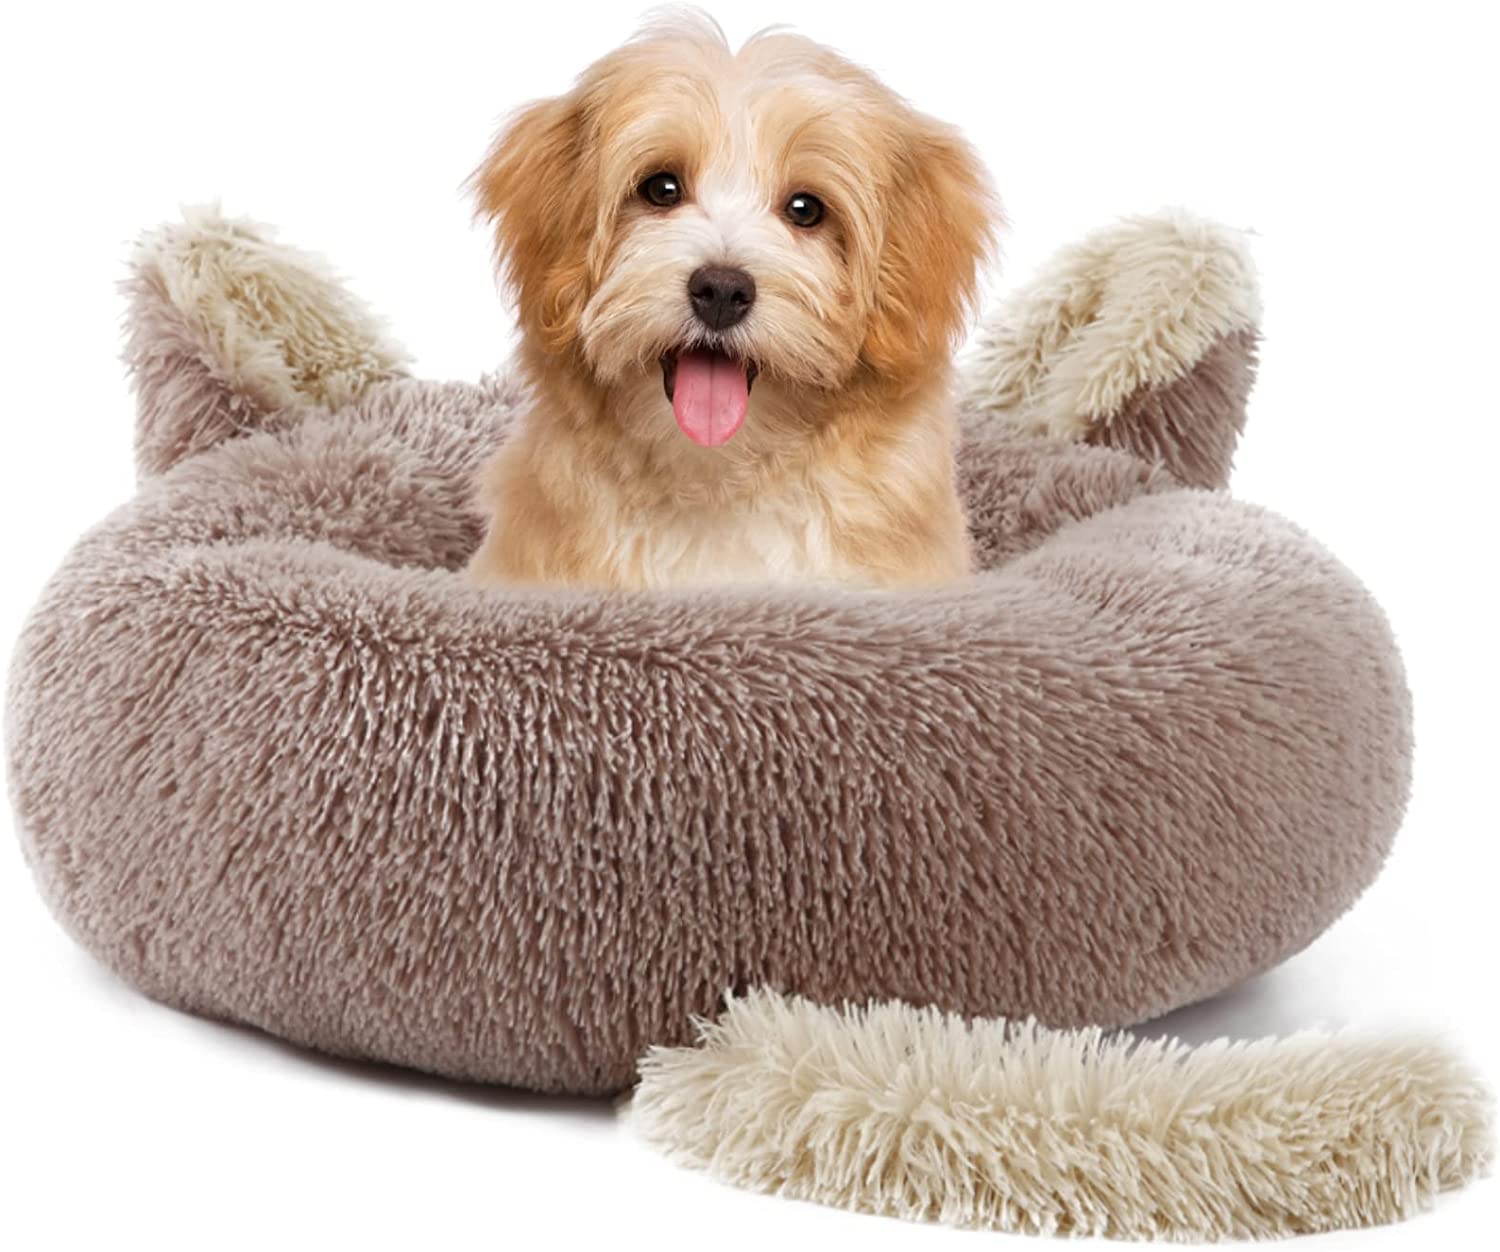 Sycoodeal Pet Bed Mat,Kennel Pad Dog Bed Cat Bed Round Donut Cat Dog Cushion,Warming Cozy Soft Dog Round Bed,Fluffy Faux Fur Plush Dog Cat Cushion Bed